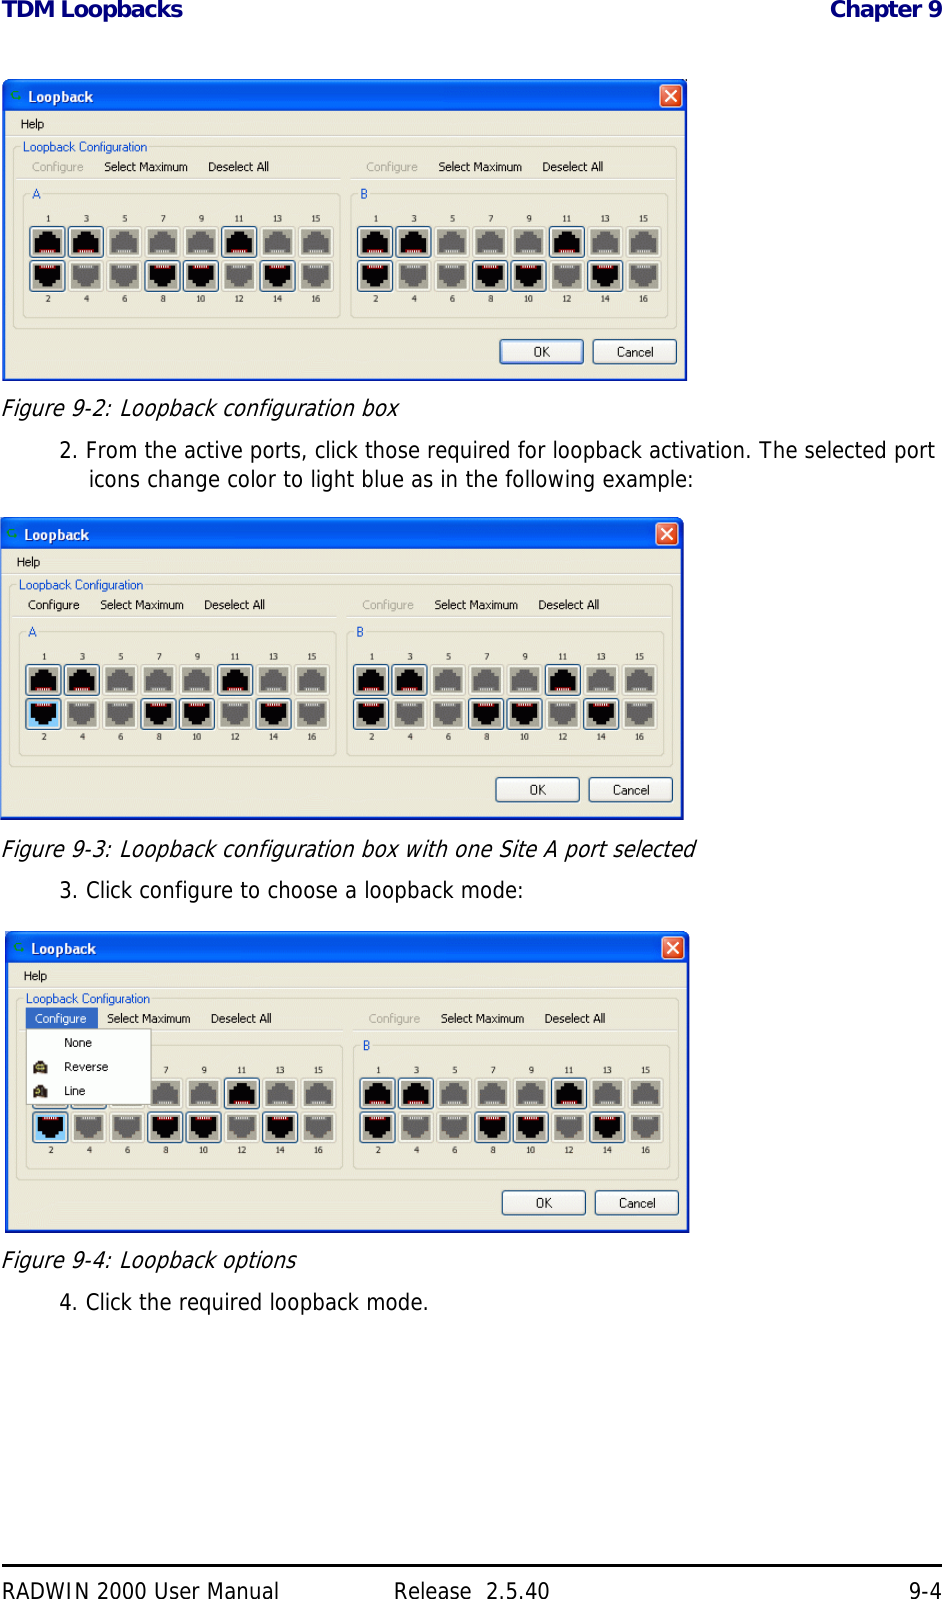 TDM Loopbacks Chapter 9RADWIN 2000 User Manual Release  2.5.40 9-4Figure 9-2: Loopback configuration box2. From the active ports, click those required for loopback activation. The selected port icons change color to light blue as in the following example:Figure 9-3: Loopback configuration box with one Site A port selected3. Click configure to choose a loopback mode:Figure 9-4: Loopback options4. Click the required loopback mode.